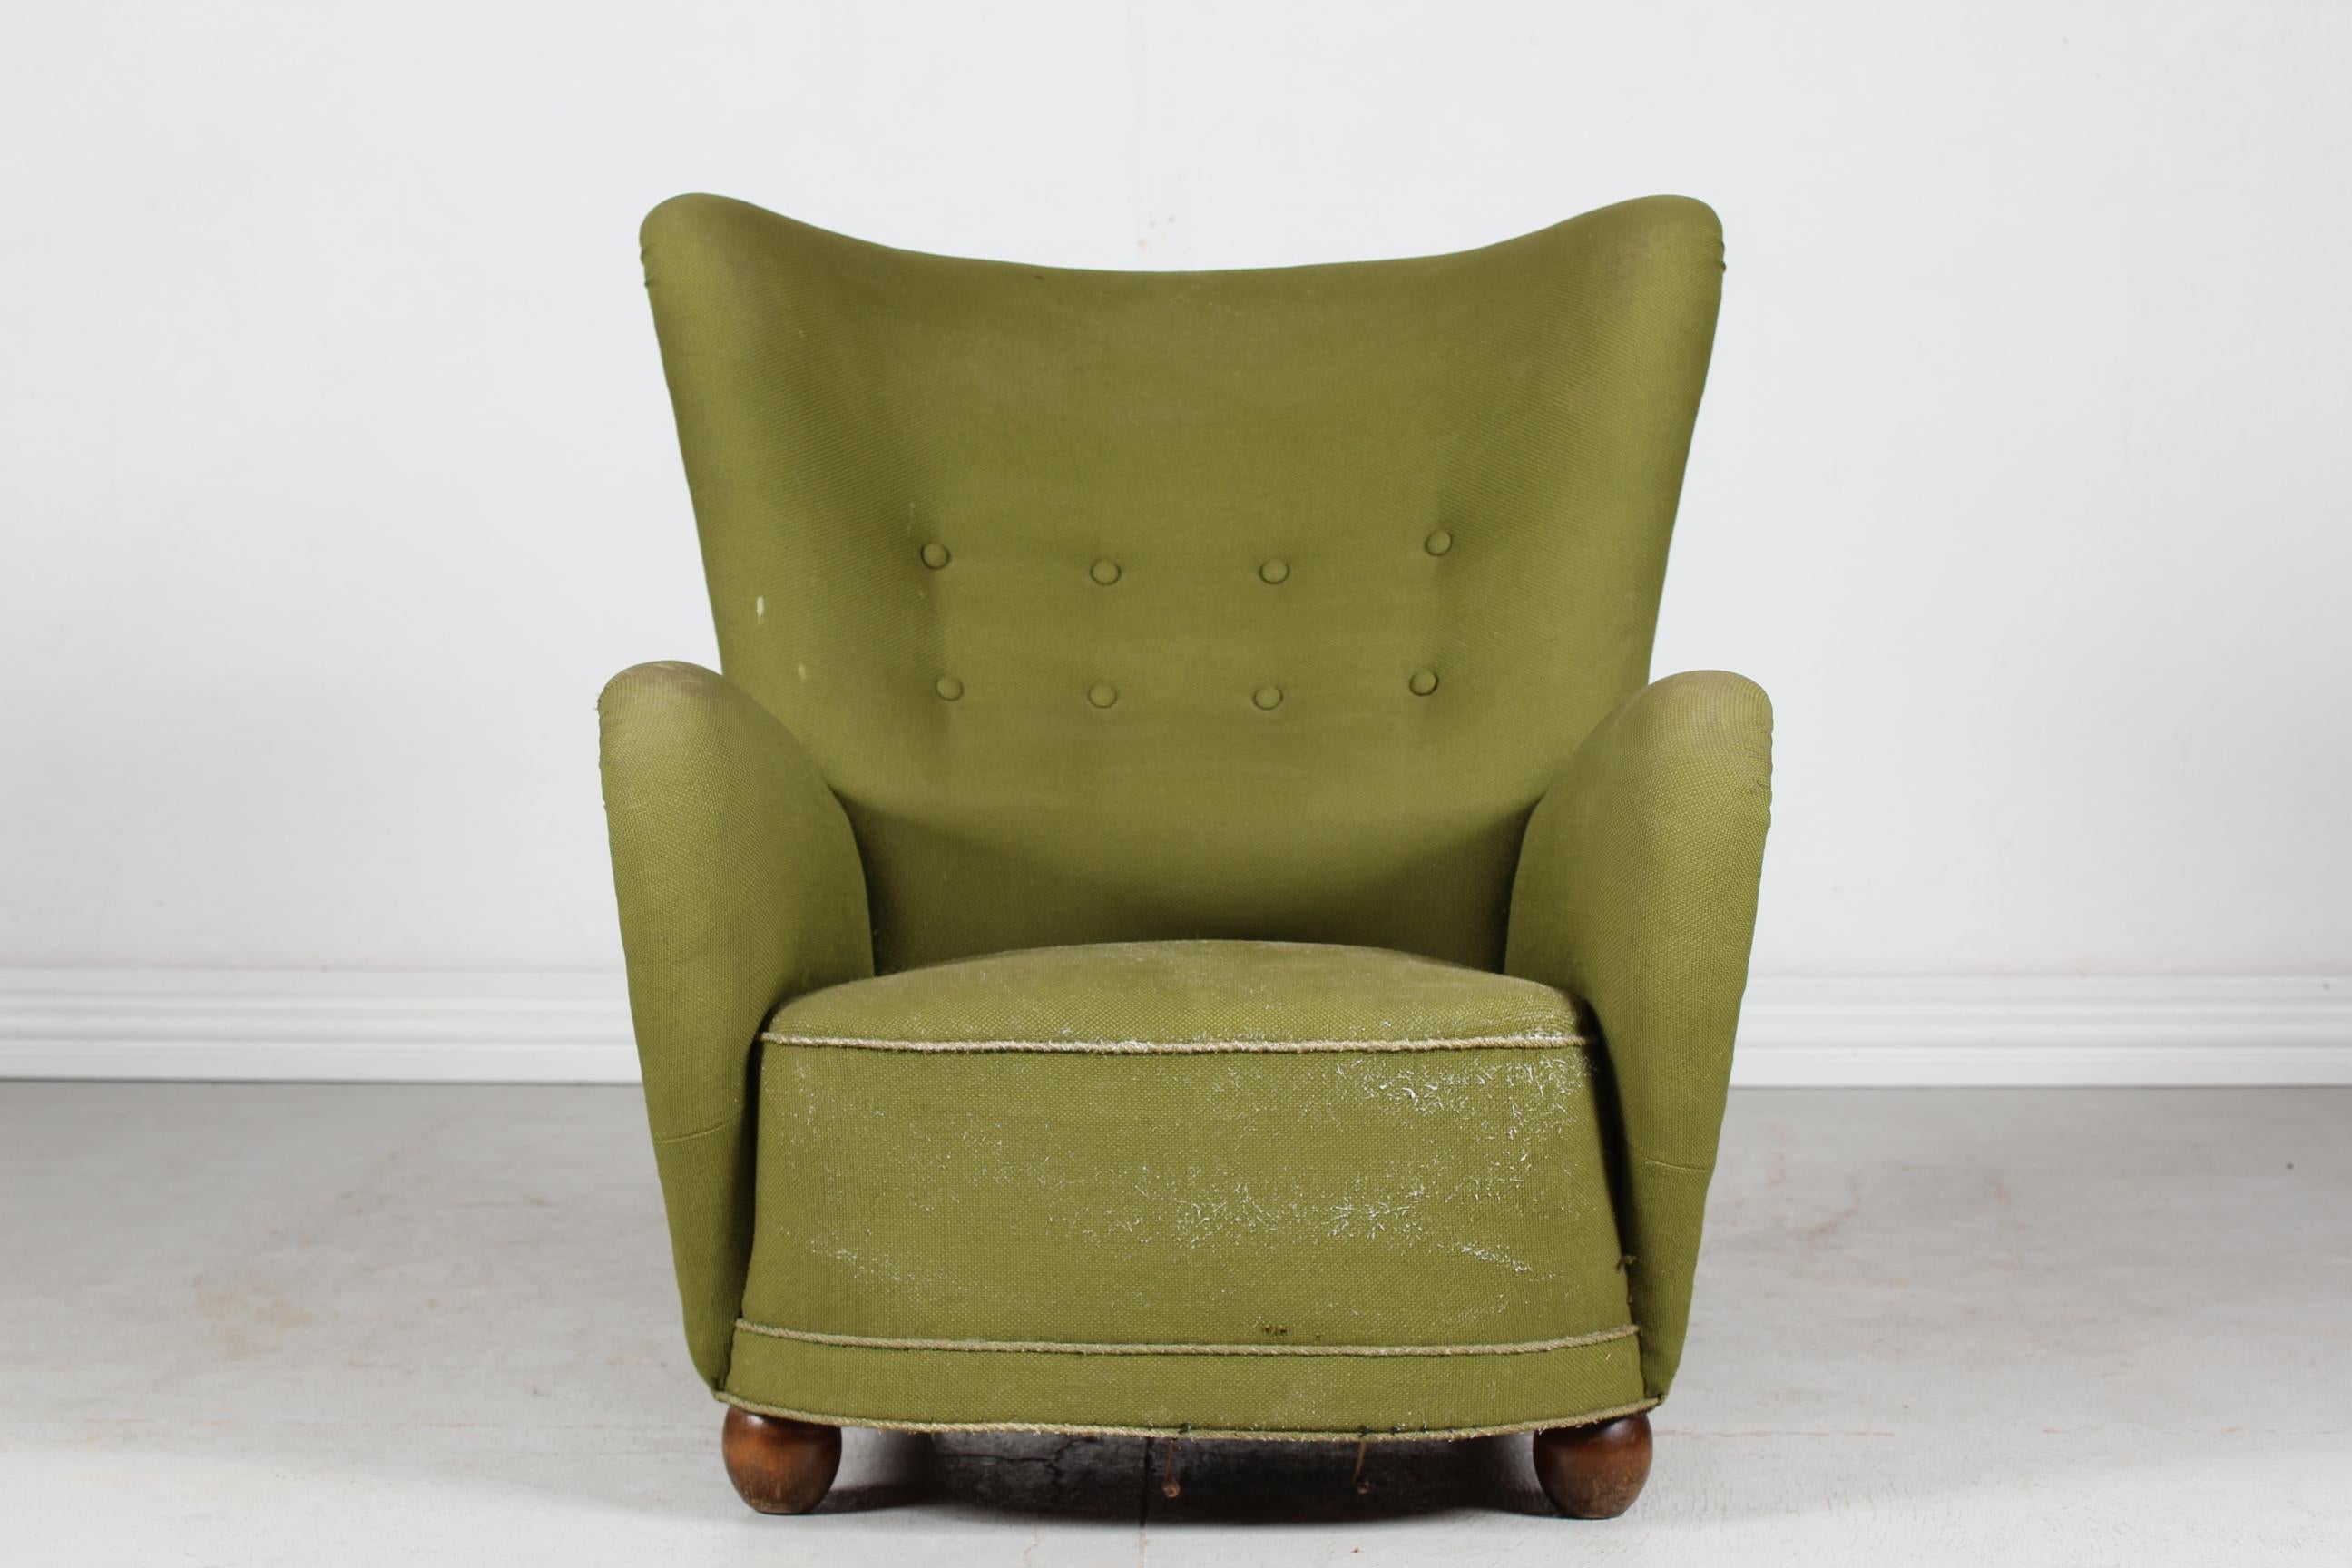 Fabric Large Danish Art Deco Lounge Chair Fritz Hansen Style, 1940s for Reupholstery